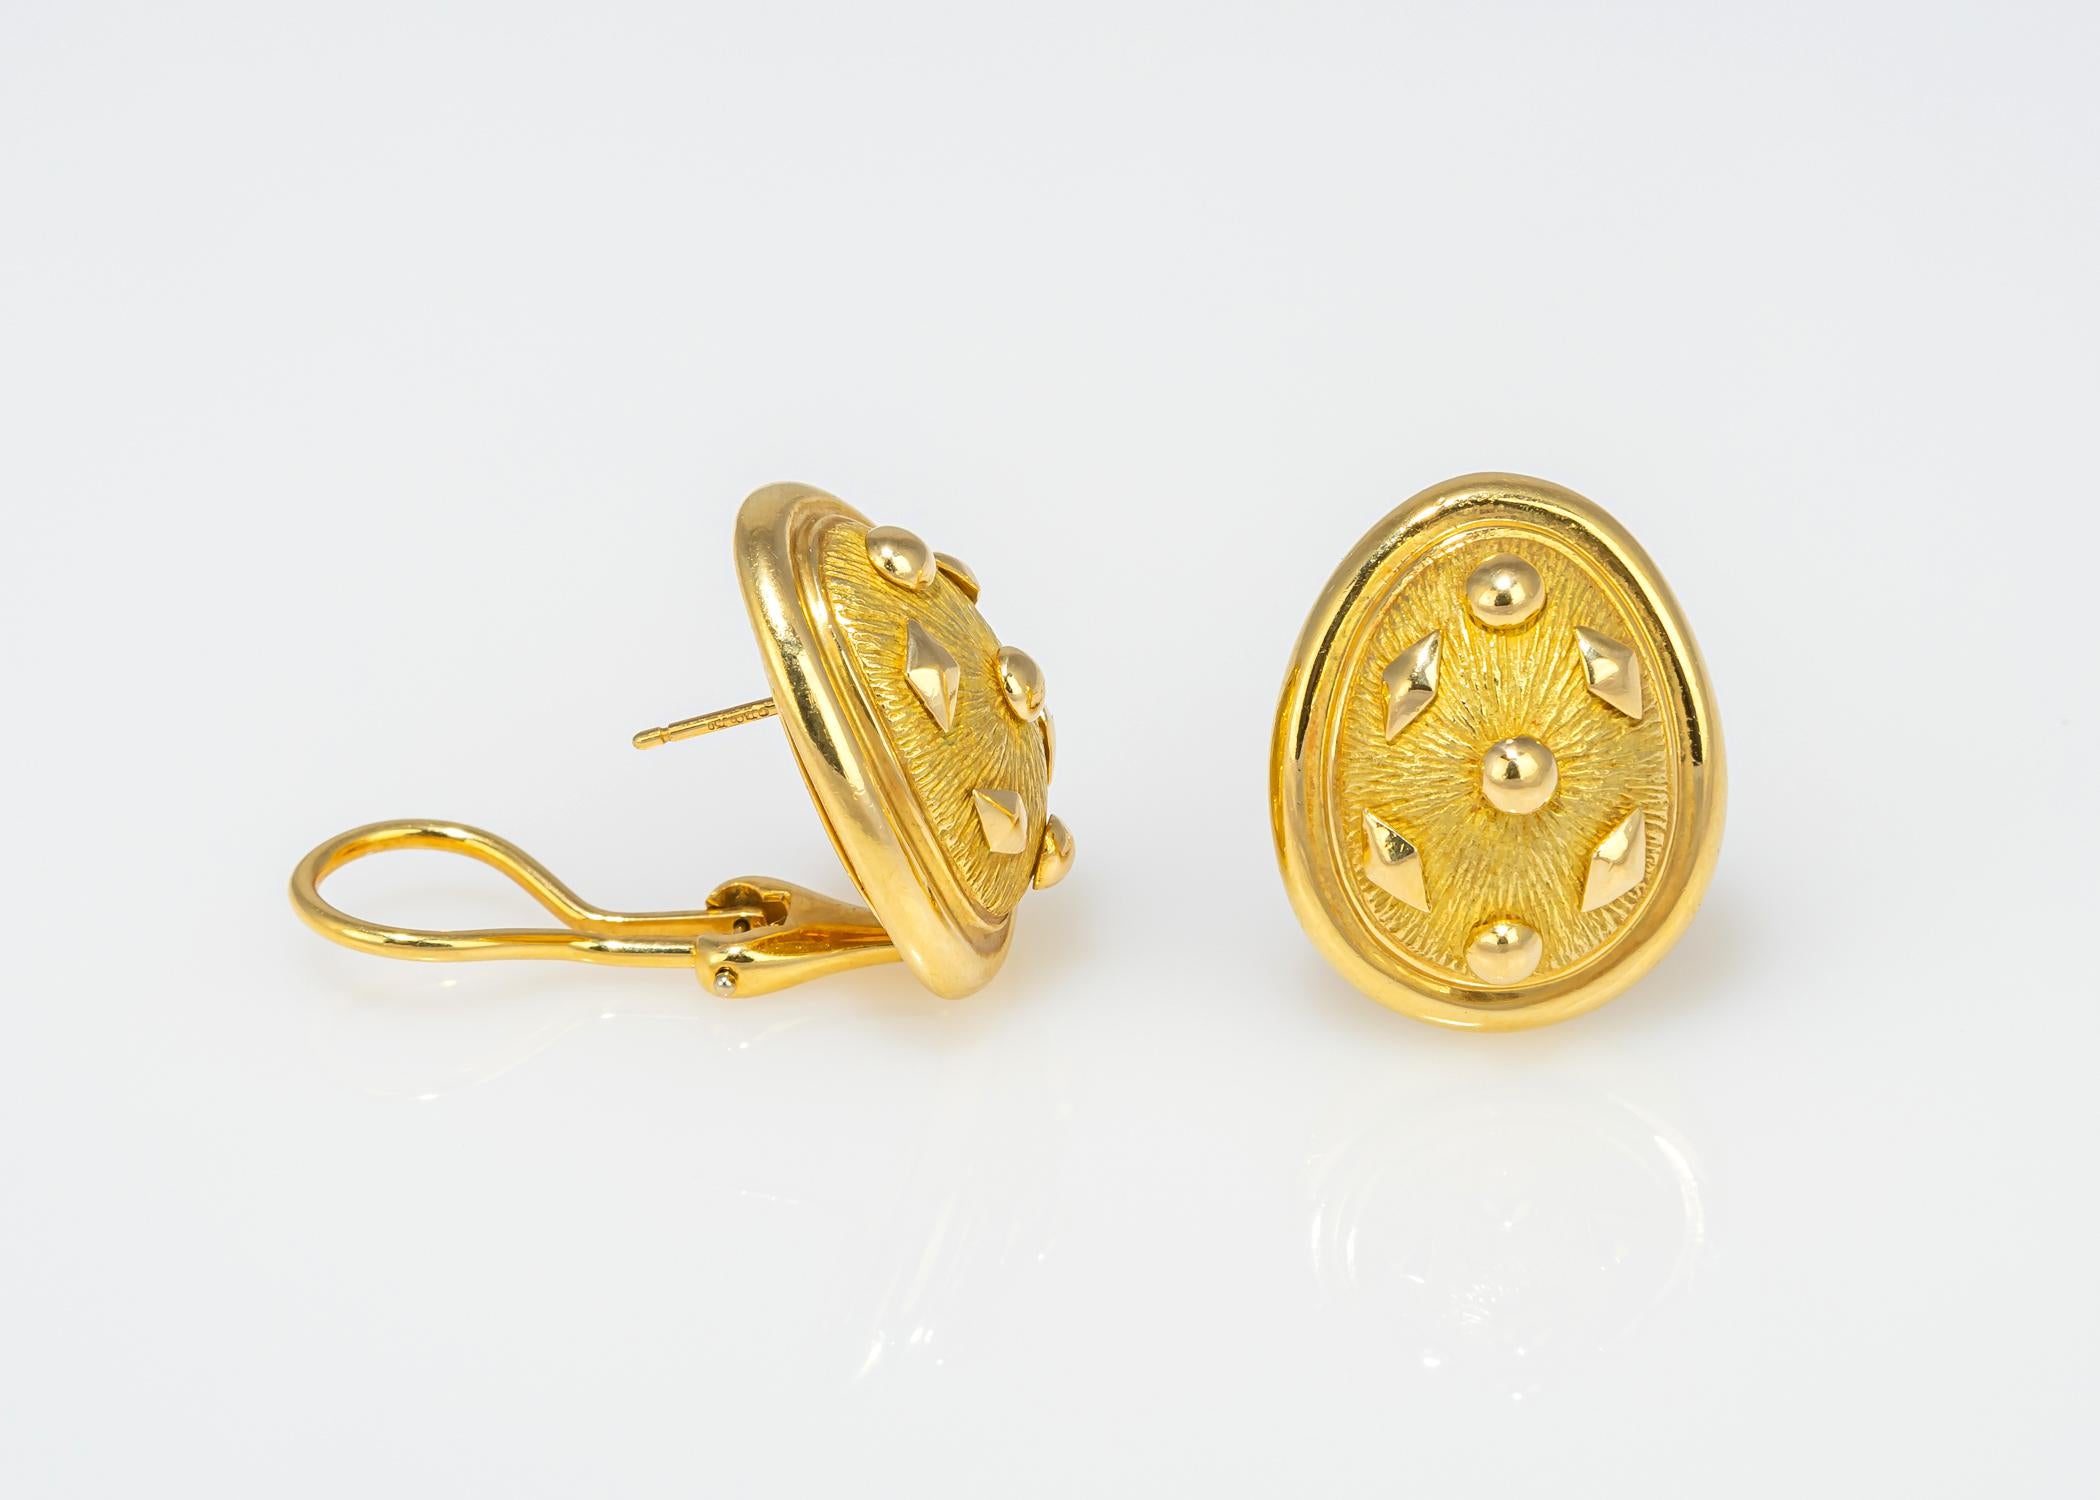 Jean Schlumberger designs are iconic and collectable. at 7/8's of an inch this all gold Dot Losange classic is your new go to earring.